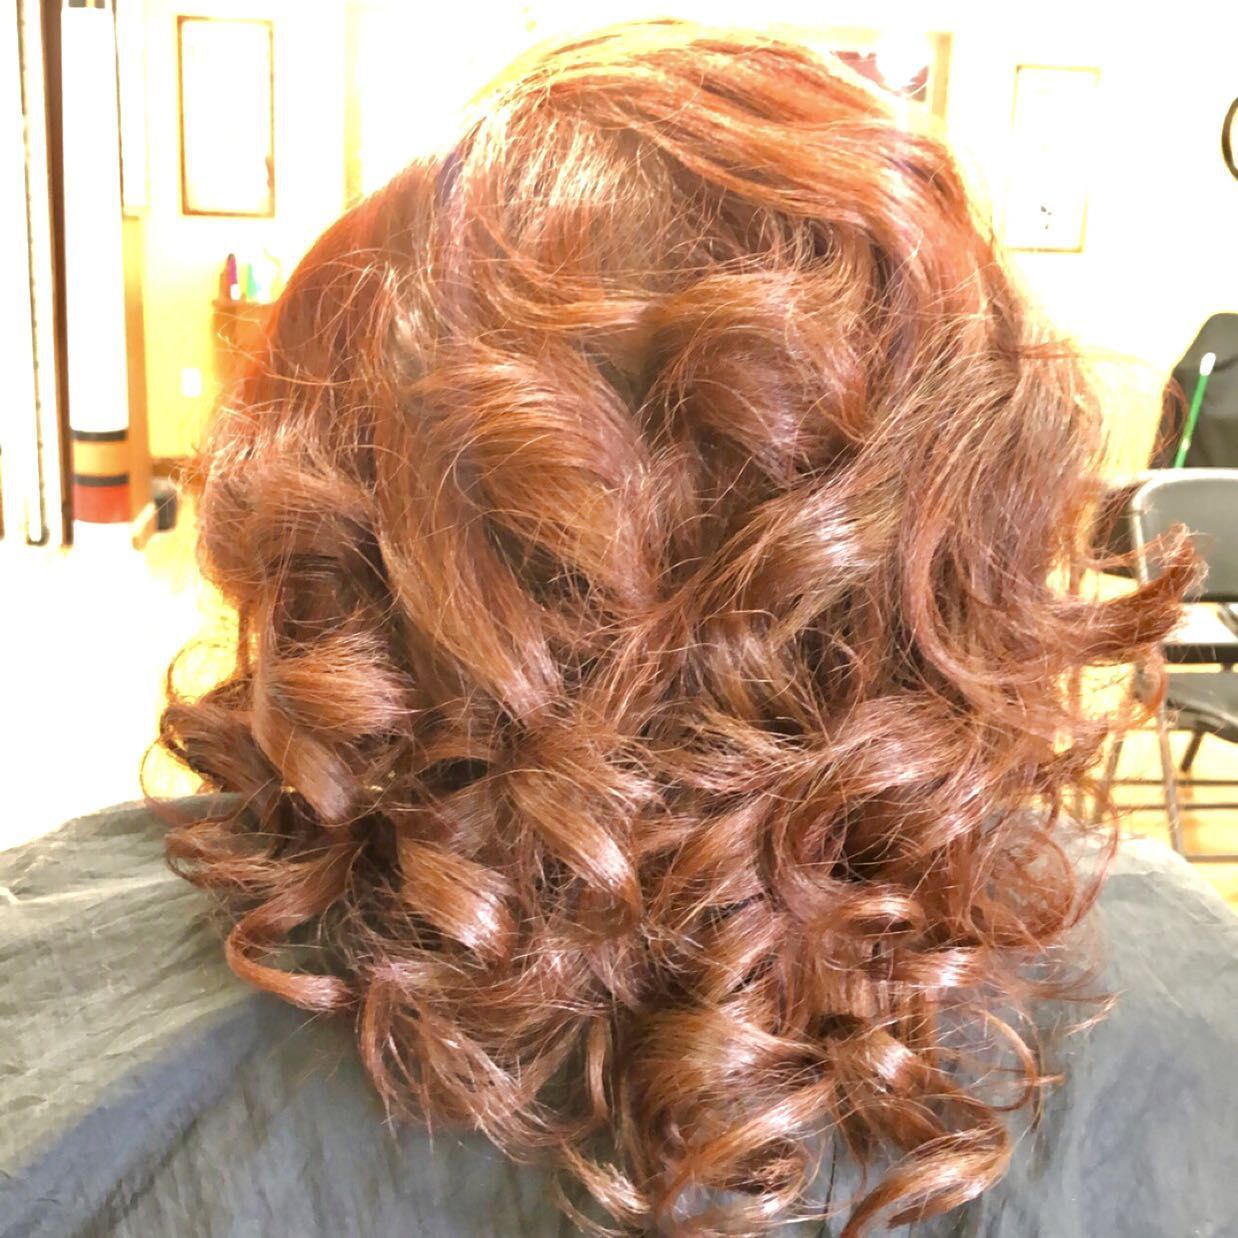 Chanel's Transformation - Warner Robins - Book Online - Prices, Reviews,  Photos